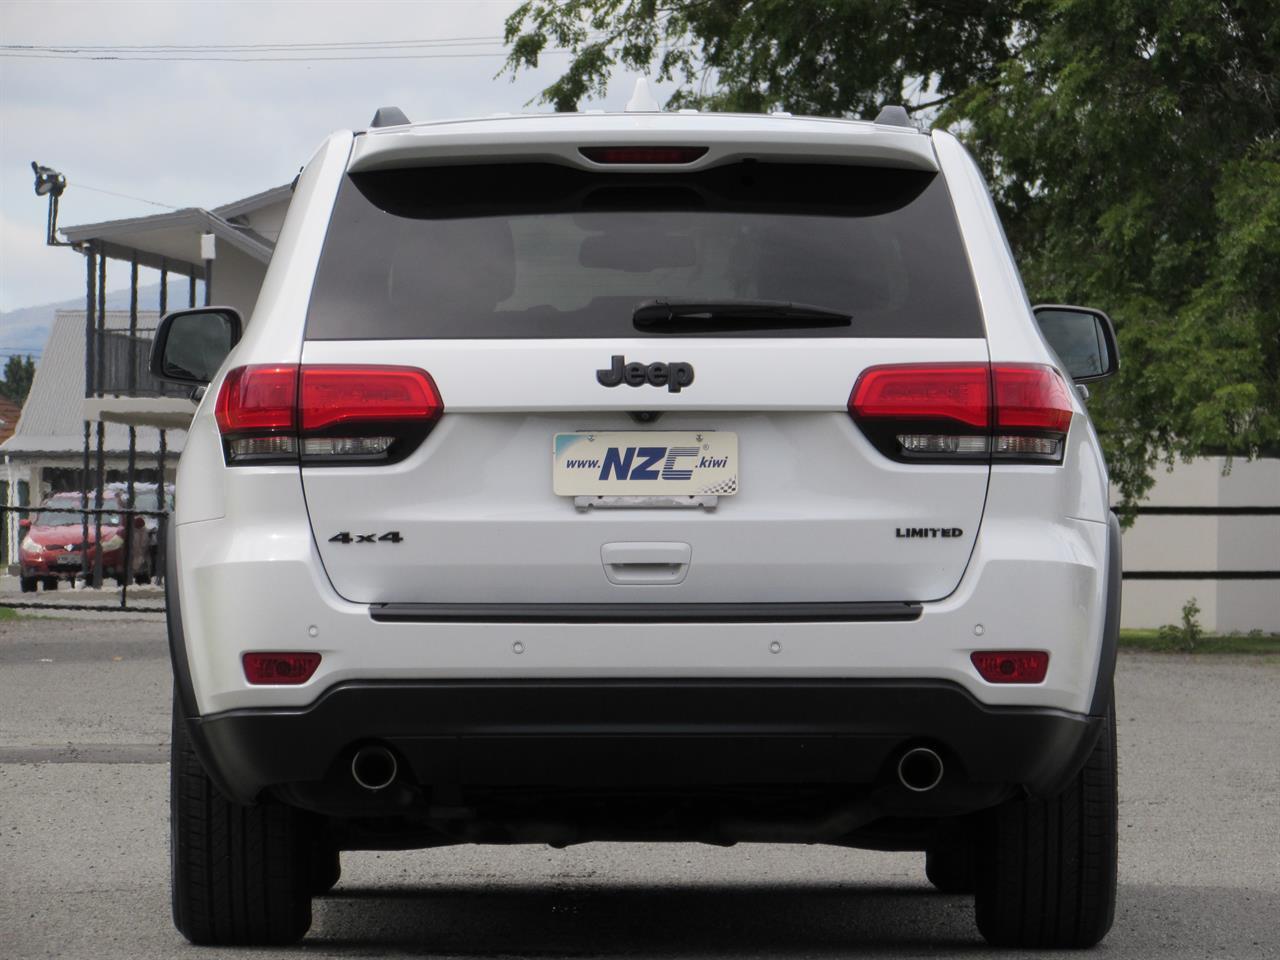 2013 Jeep Grand Cherokee only $131 weekly